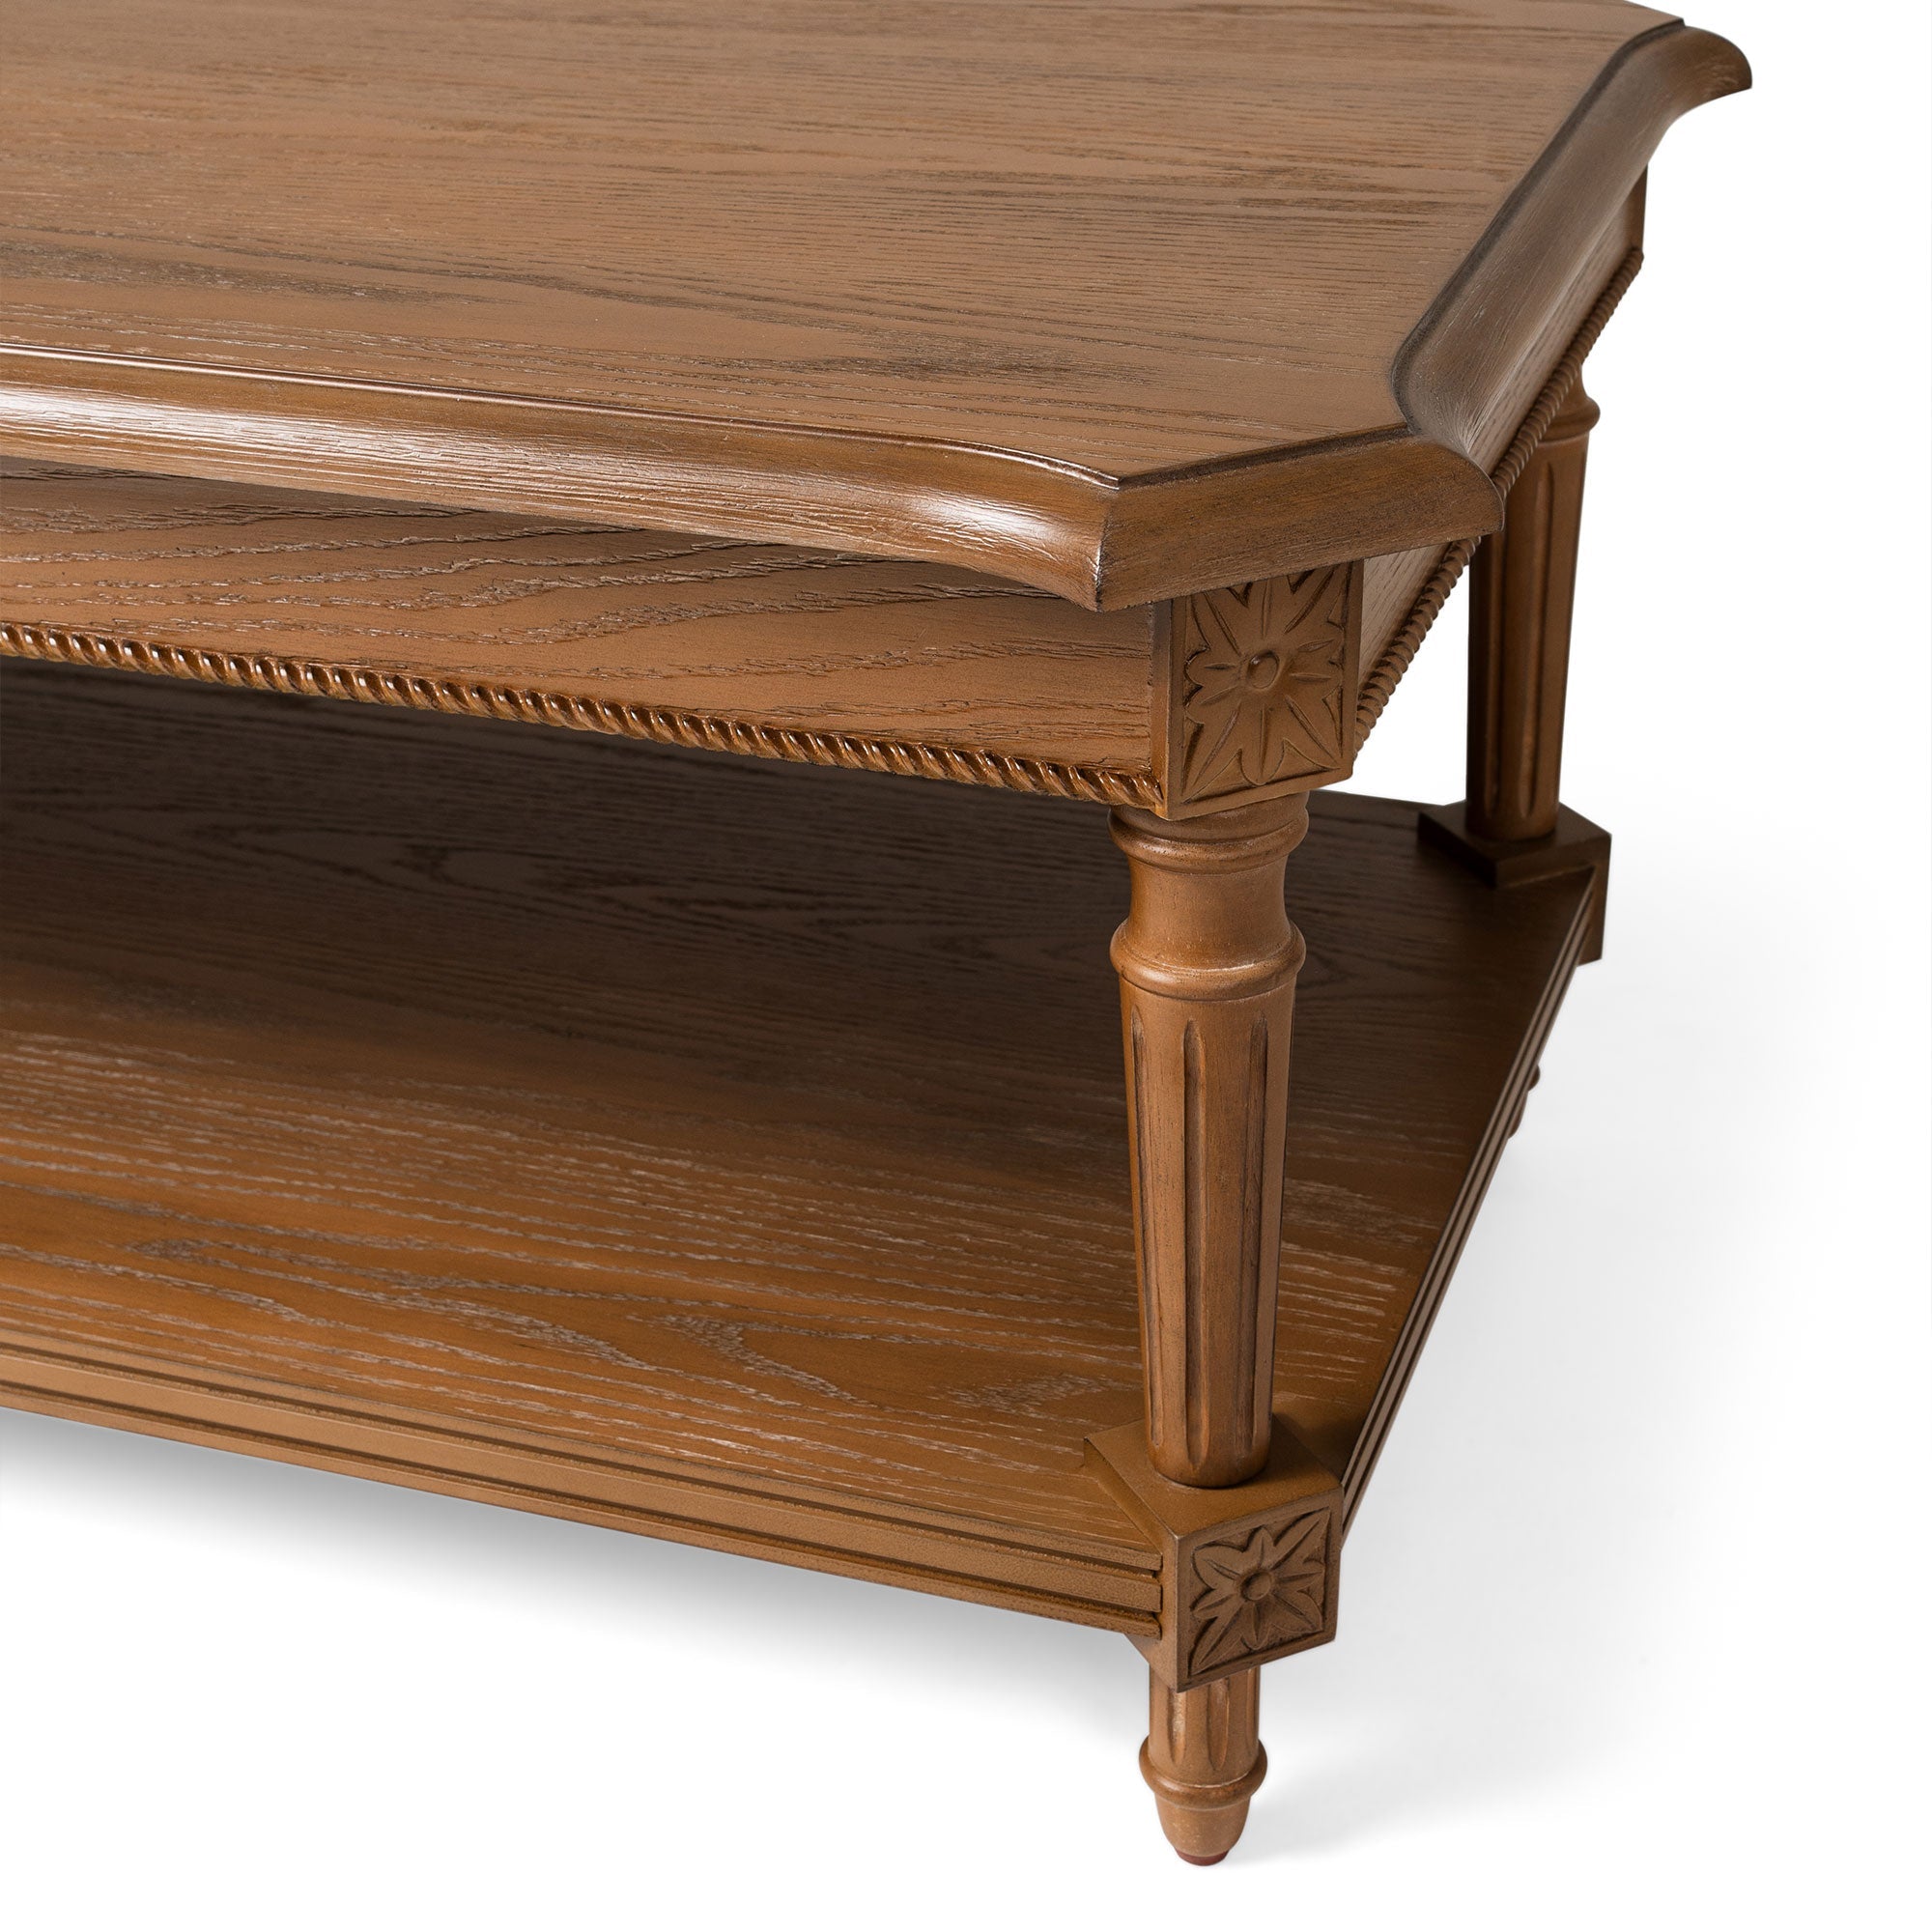 Pullman Traditional Rectangular Wooden Coffee Table in Antiqued Natural Finish in Accent Tables by Maven Lane